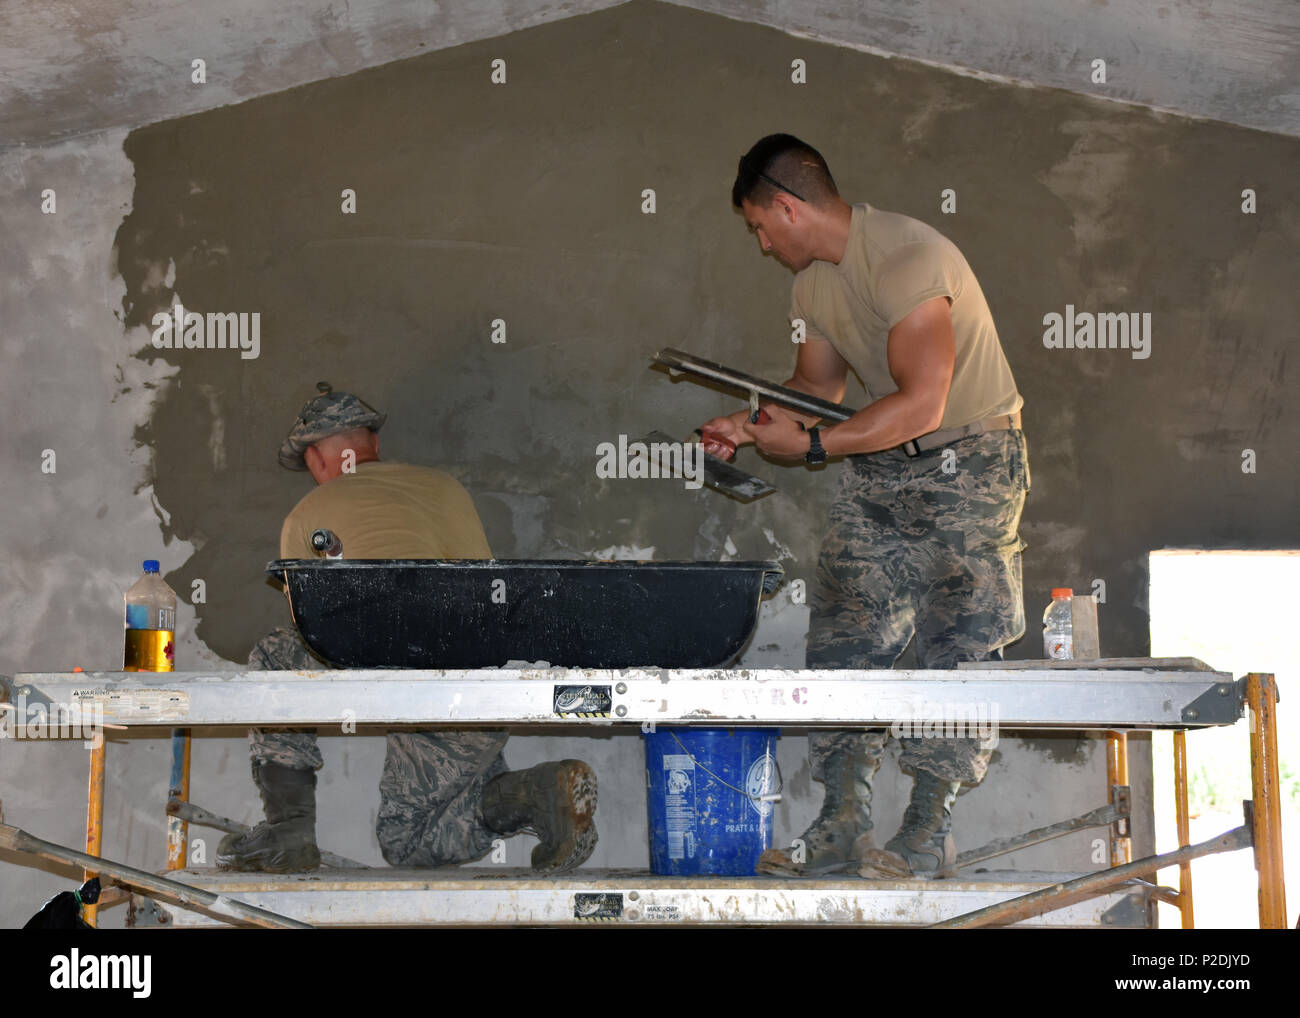 Second Lieutenant Michael Lozy (right) and Master Sgt. David Guilmette from the 143d Civil Engineering Squadron (CES), Rhode Island Air National Guard skim coats a cement mix which strengthens walls for extreme weather conditions in Inarajan, Guam during an Innovative Readiness Training (IRT) project on September 2, 2016.  The IRT project, in conjunction with Habitat for Humanity Guam is to provide two homes for residents in Inarajan.  The members are part of a 36 Airmen crew from a cross section of trades within the CES.  U.S. Air National Guard photo by Master Sgt. John V. McDonald Stock Photo